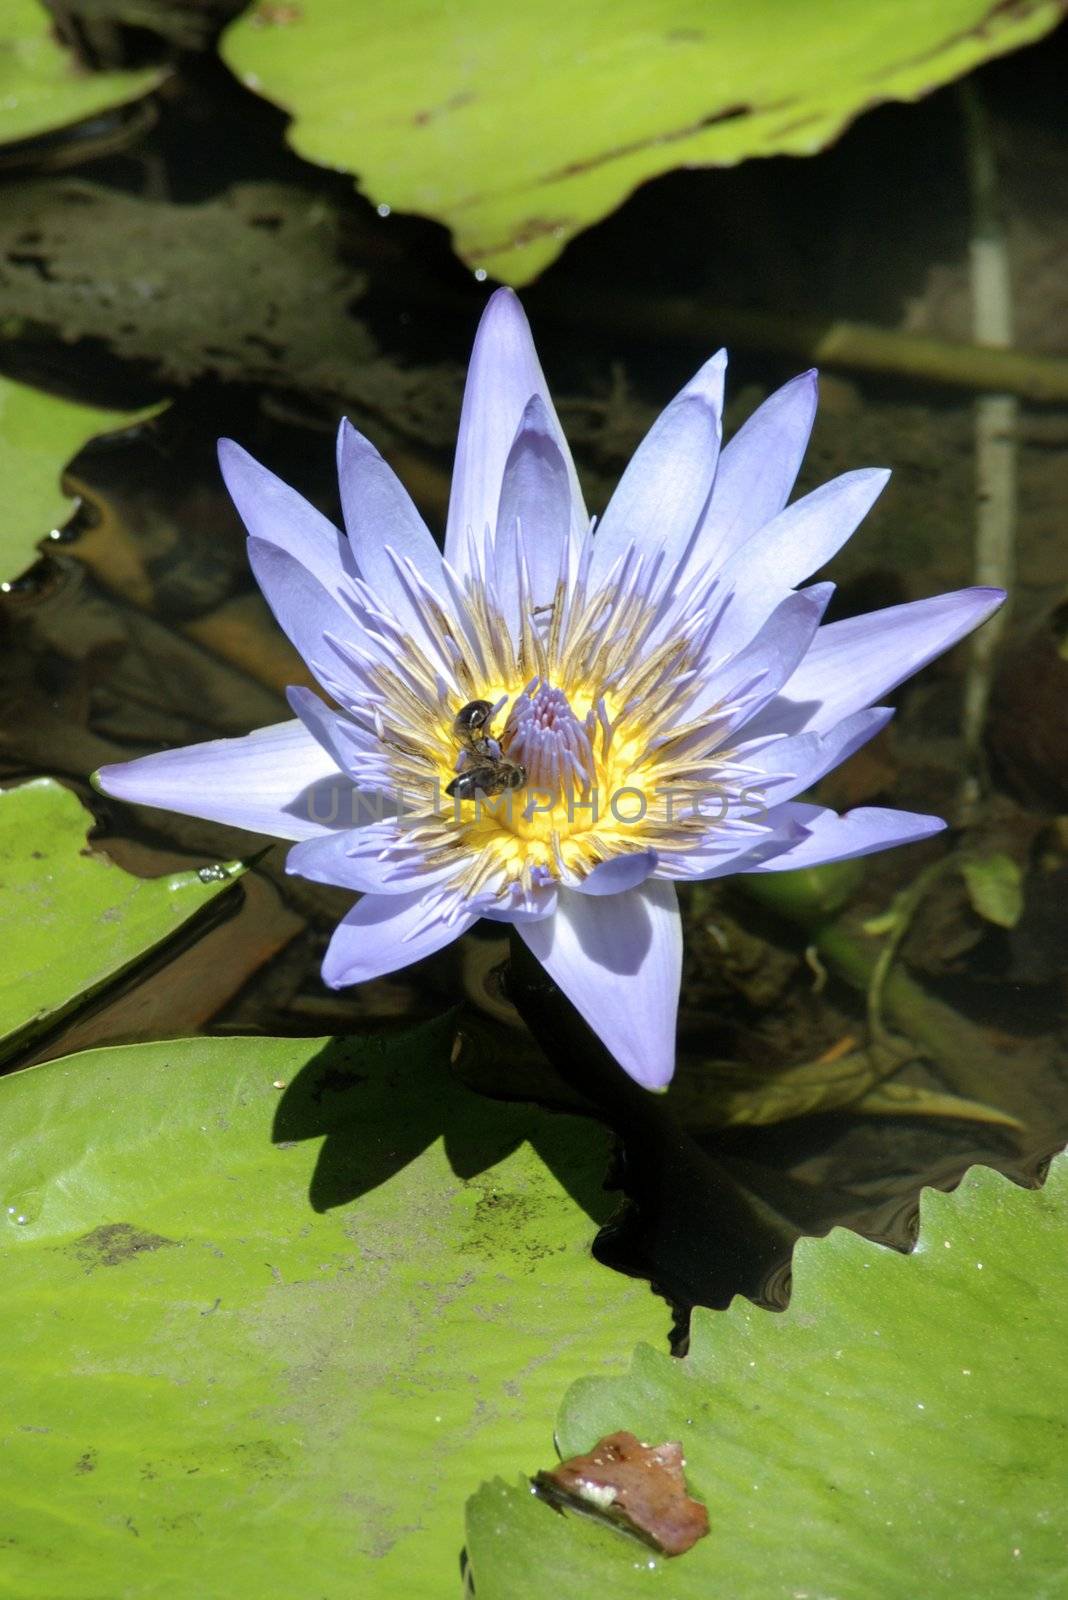 Water lily 004 by Morrismann